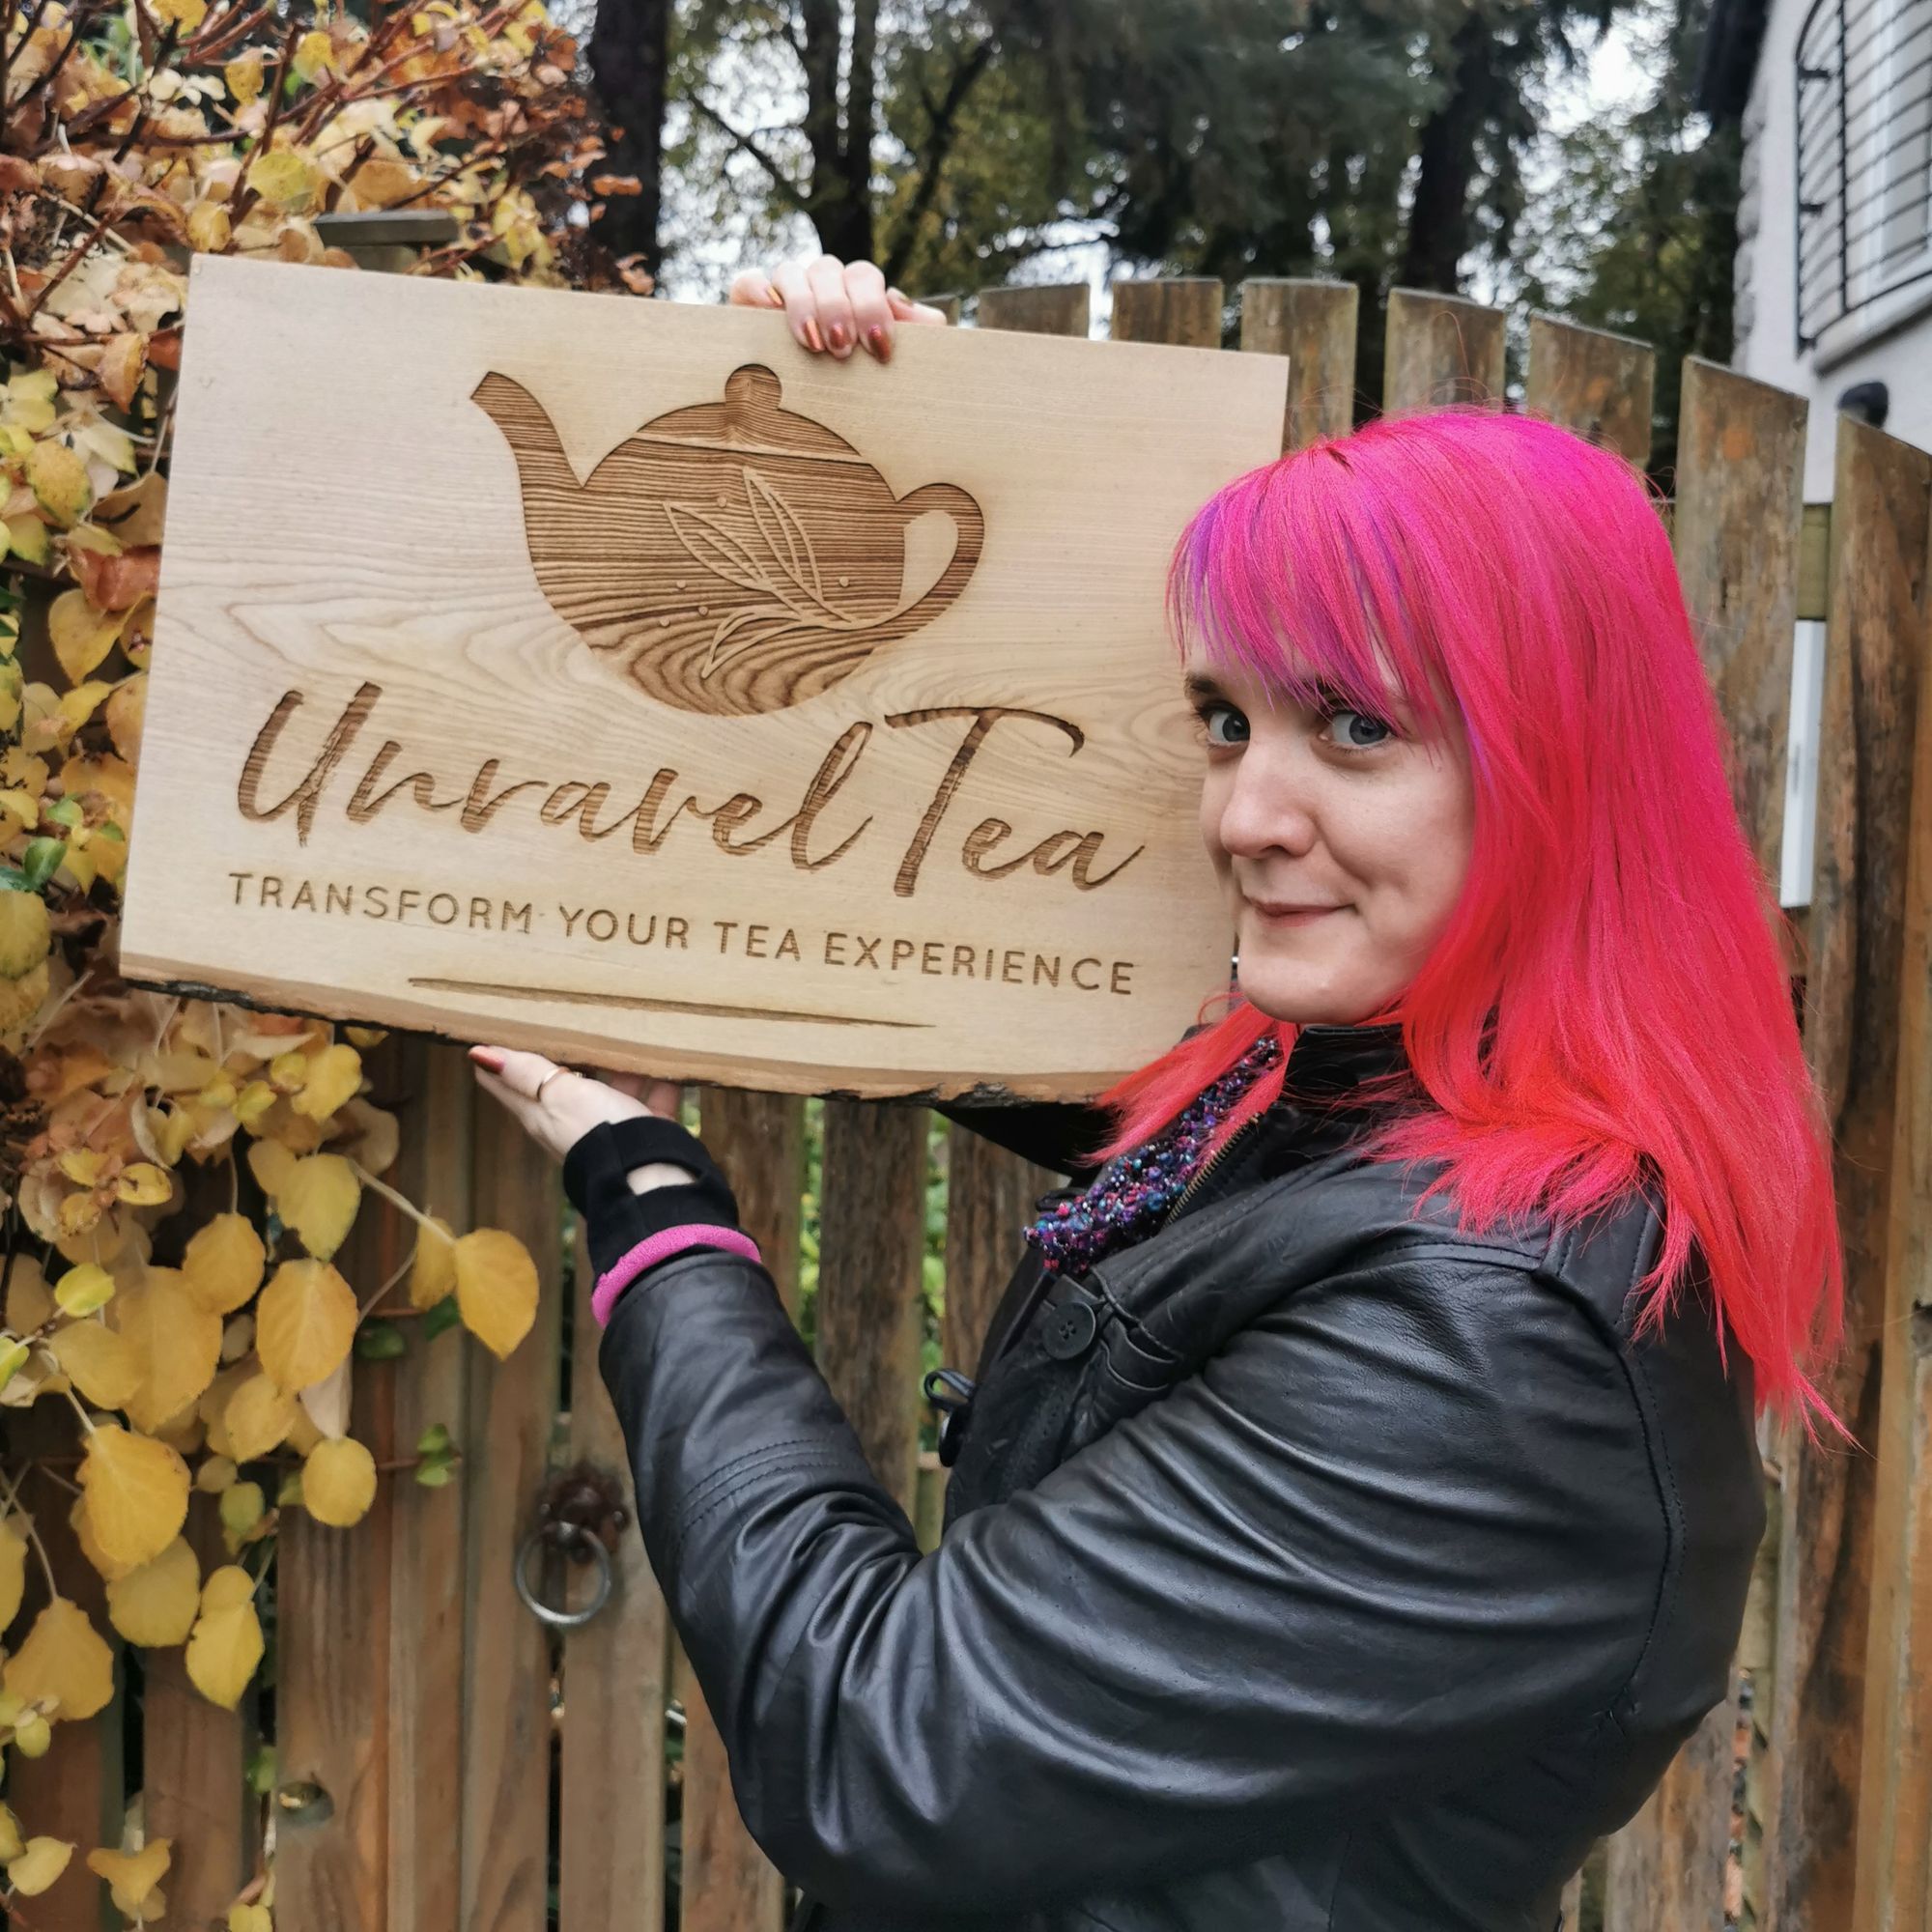 Level-up your tea experience - Unravel Tea